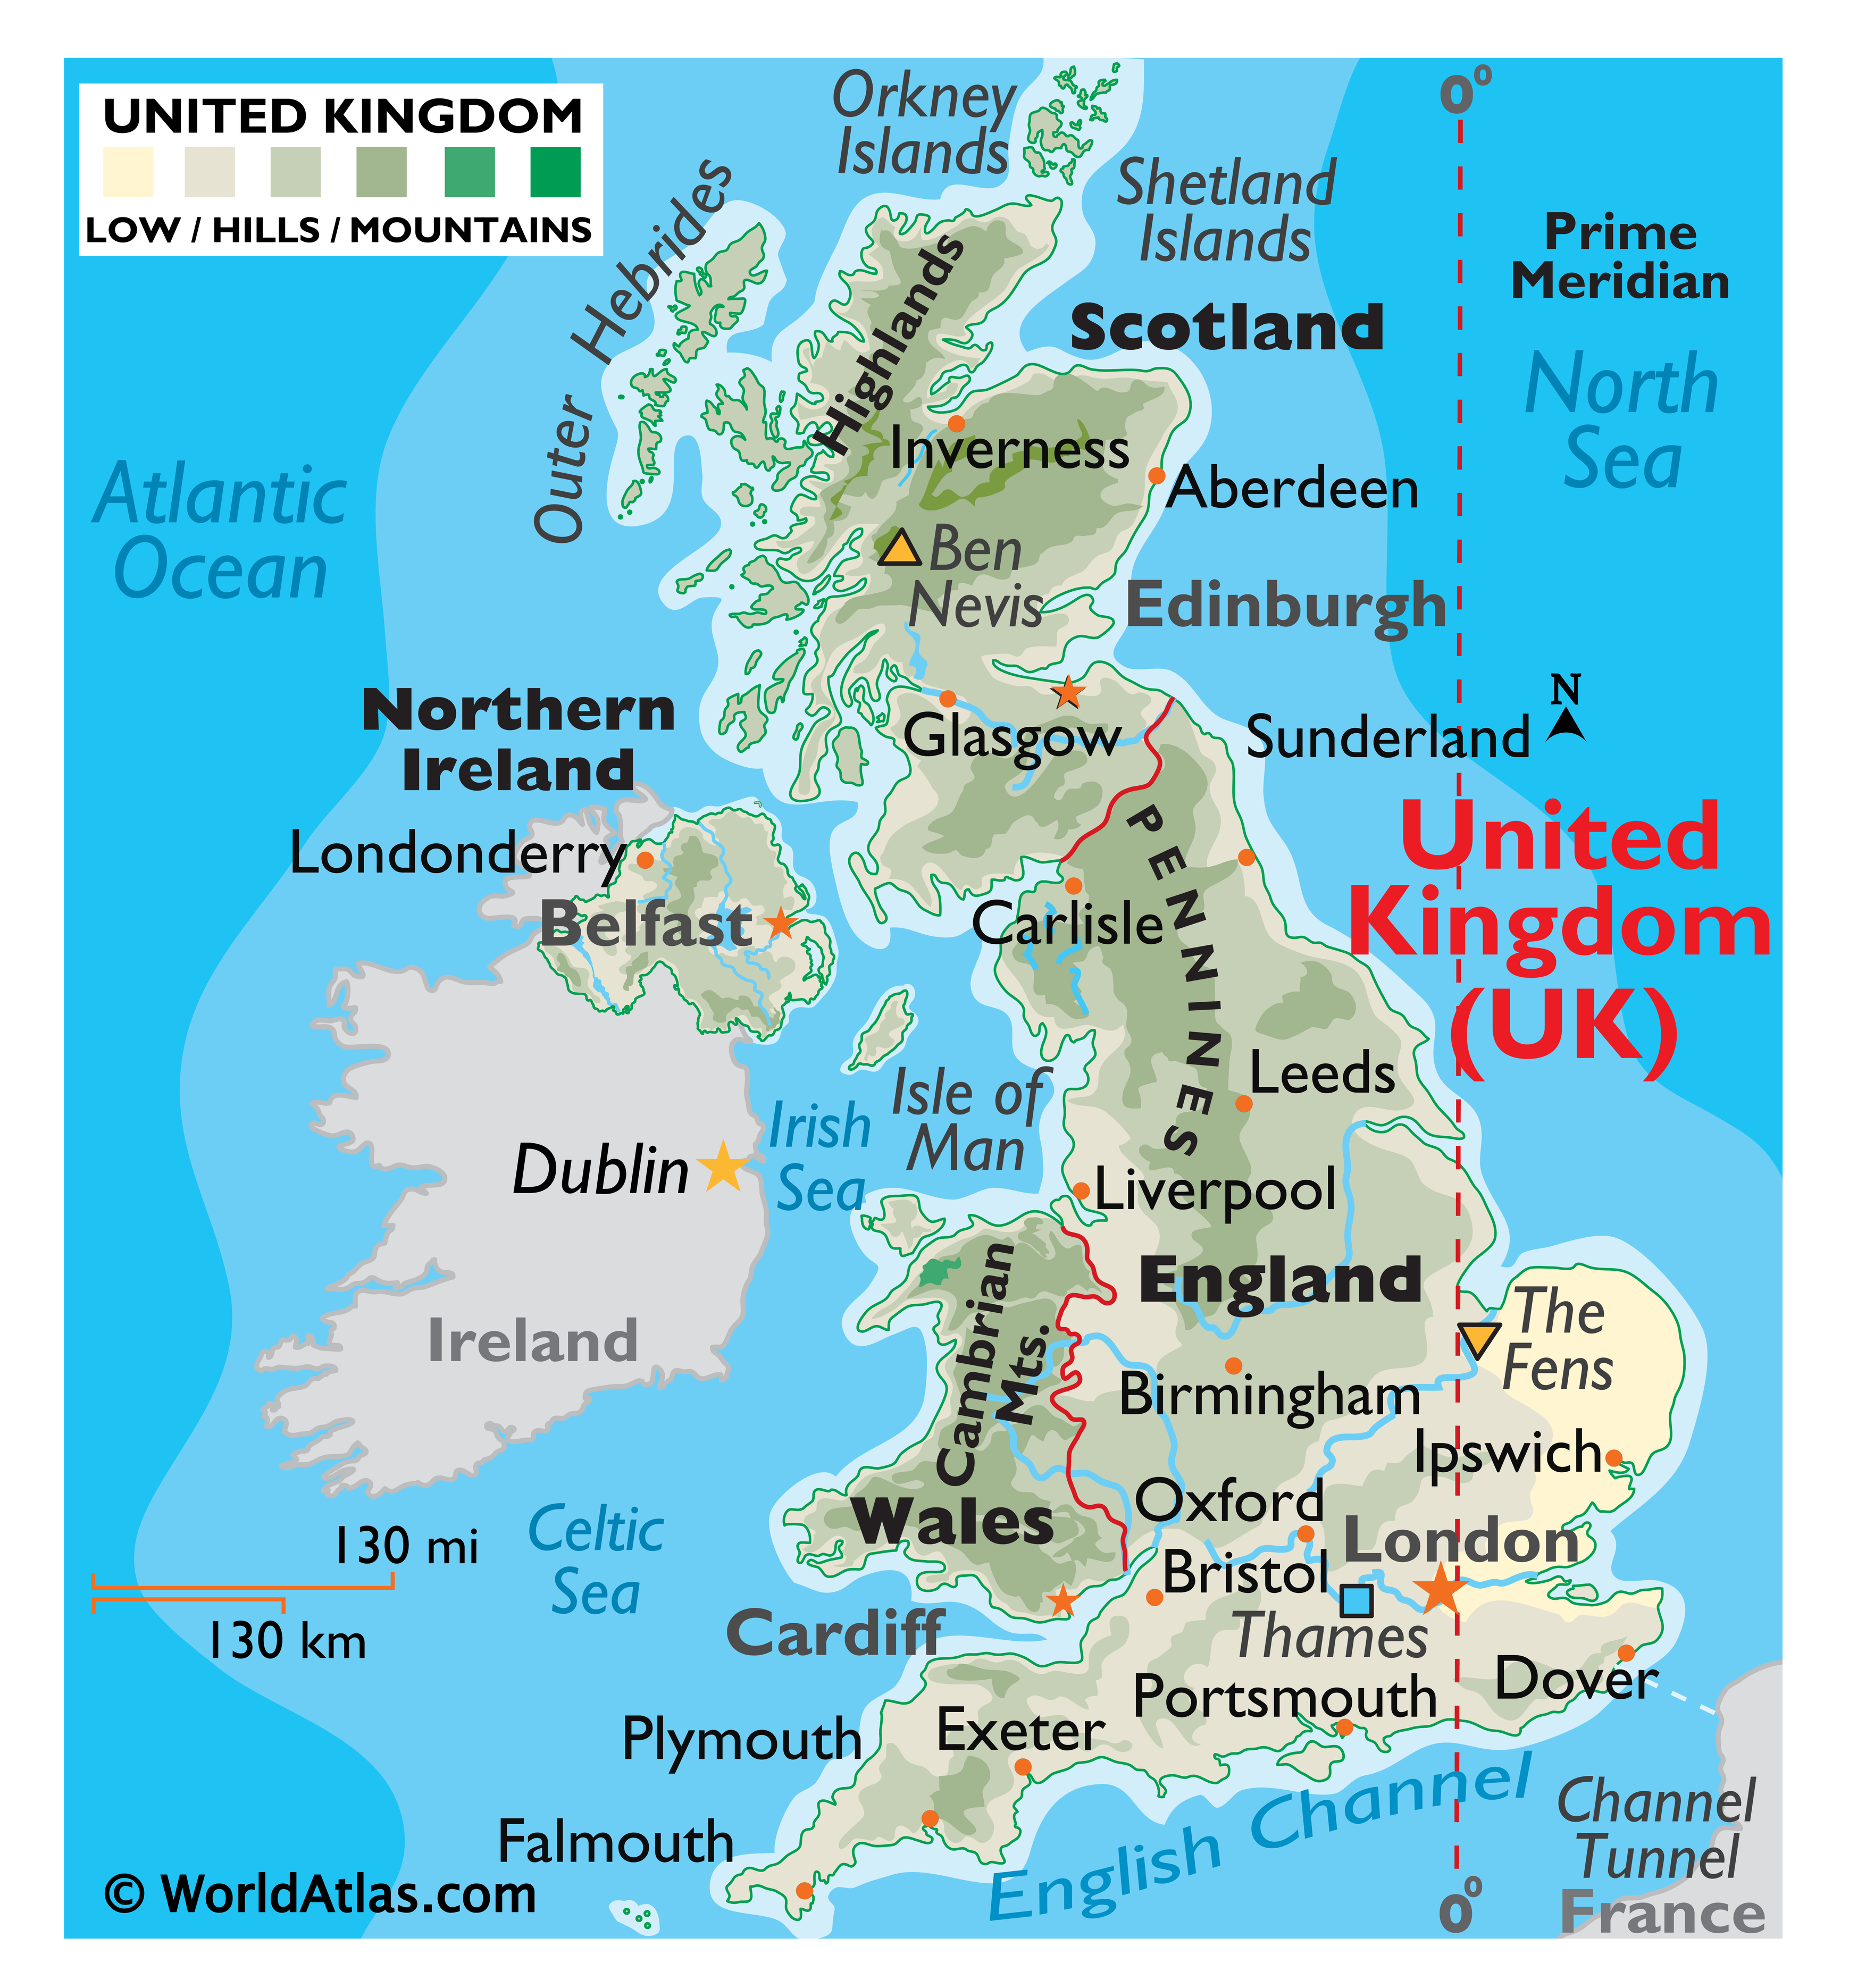 The United Kingdom Maps & Facts